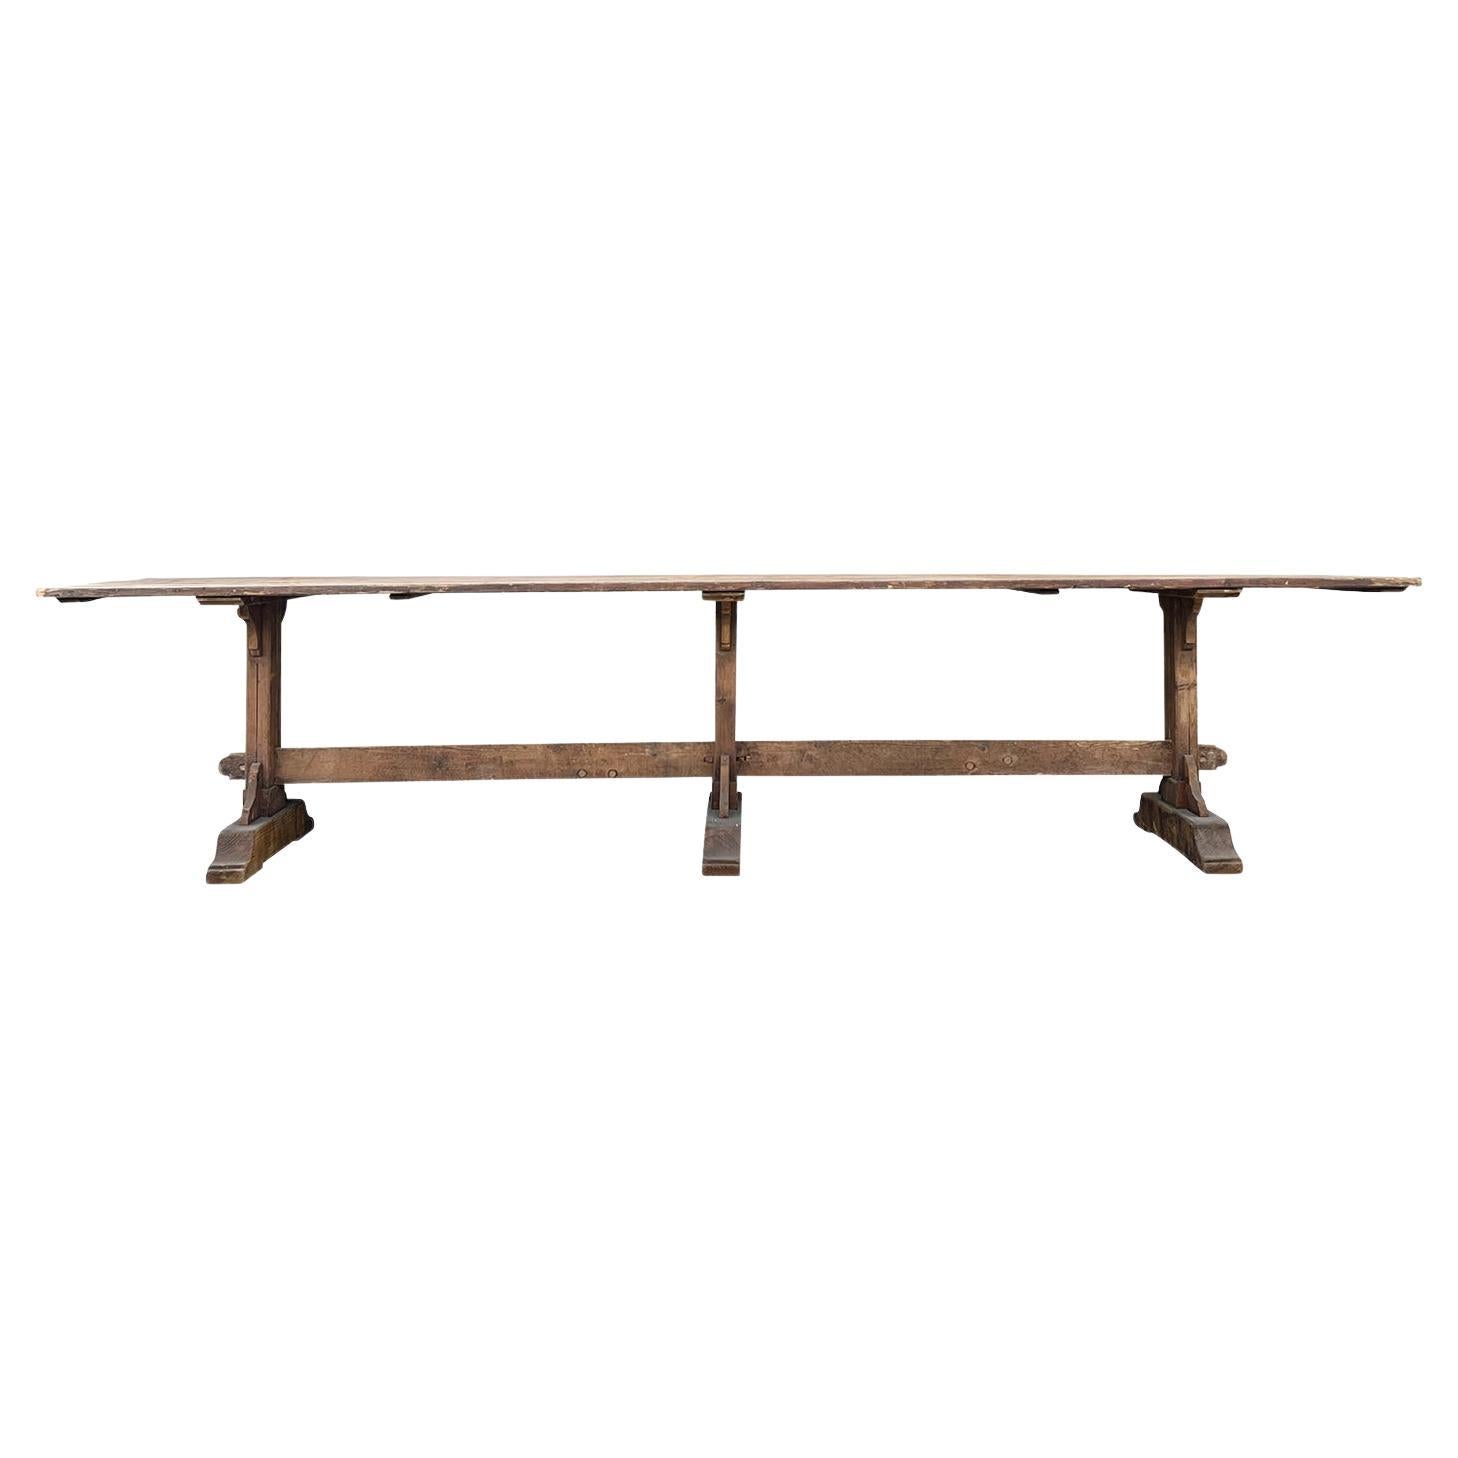 19th Century French Pinewood Trestle Table - Antique Dining Room Table For Sale